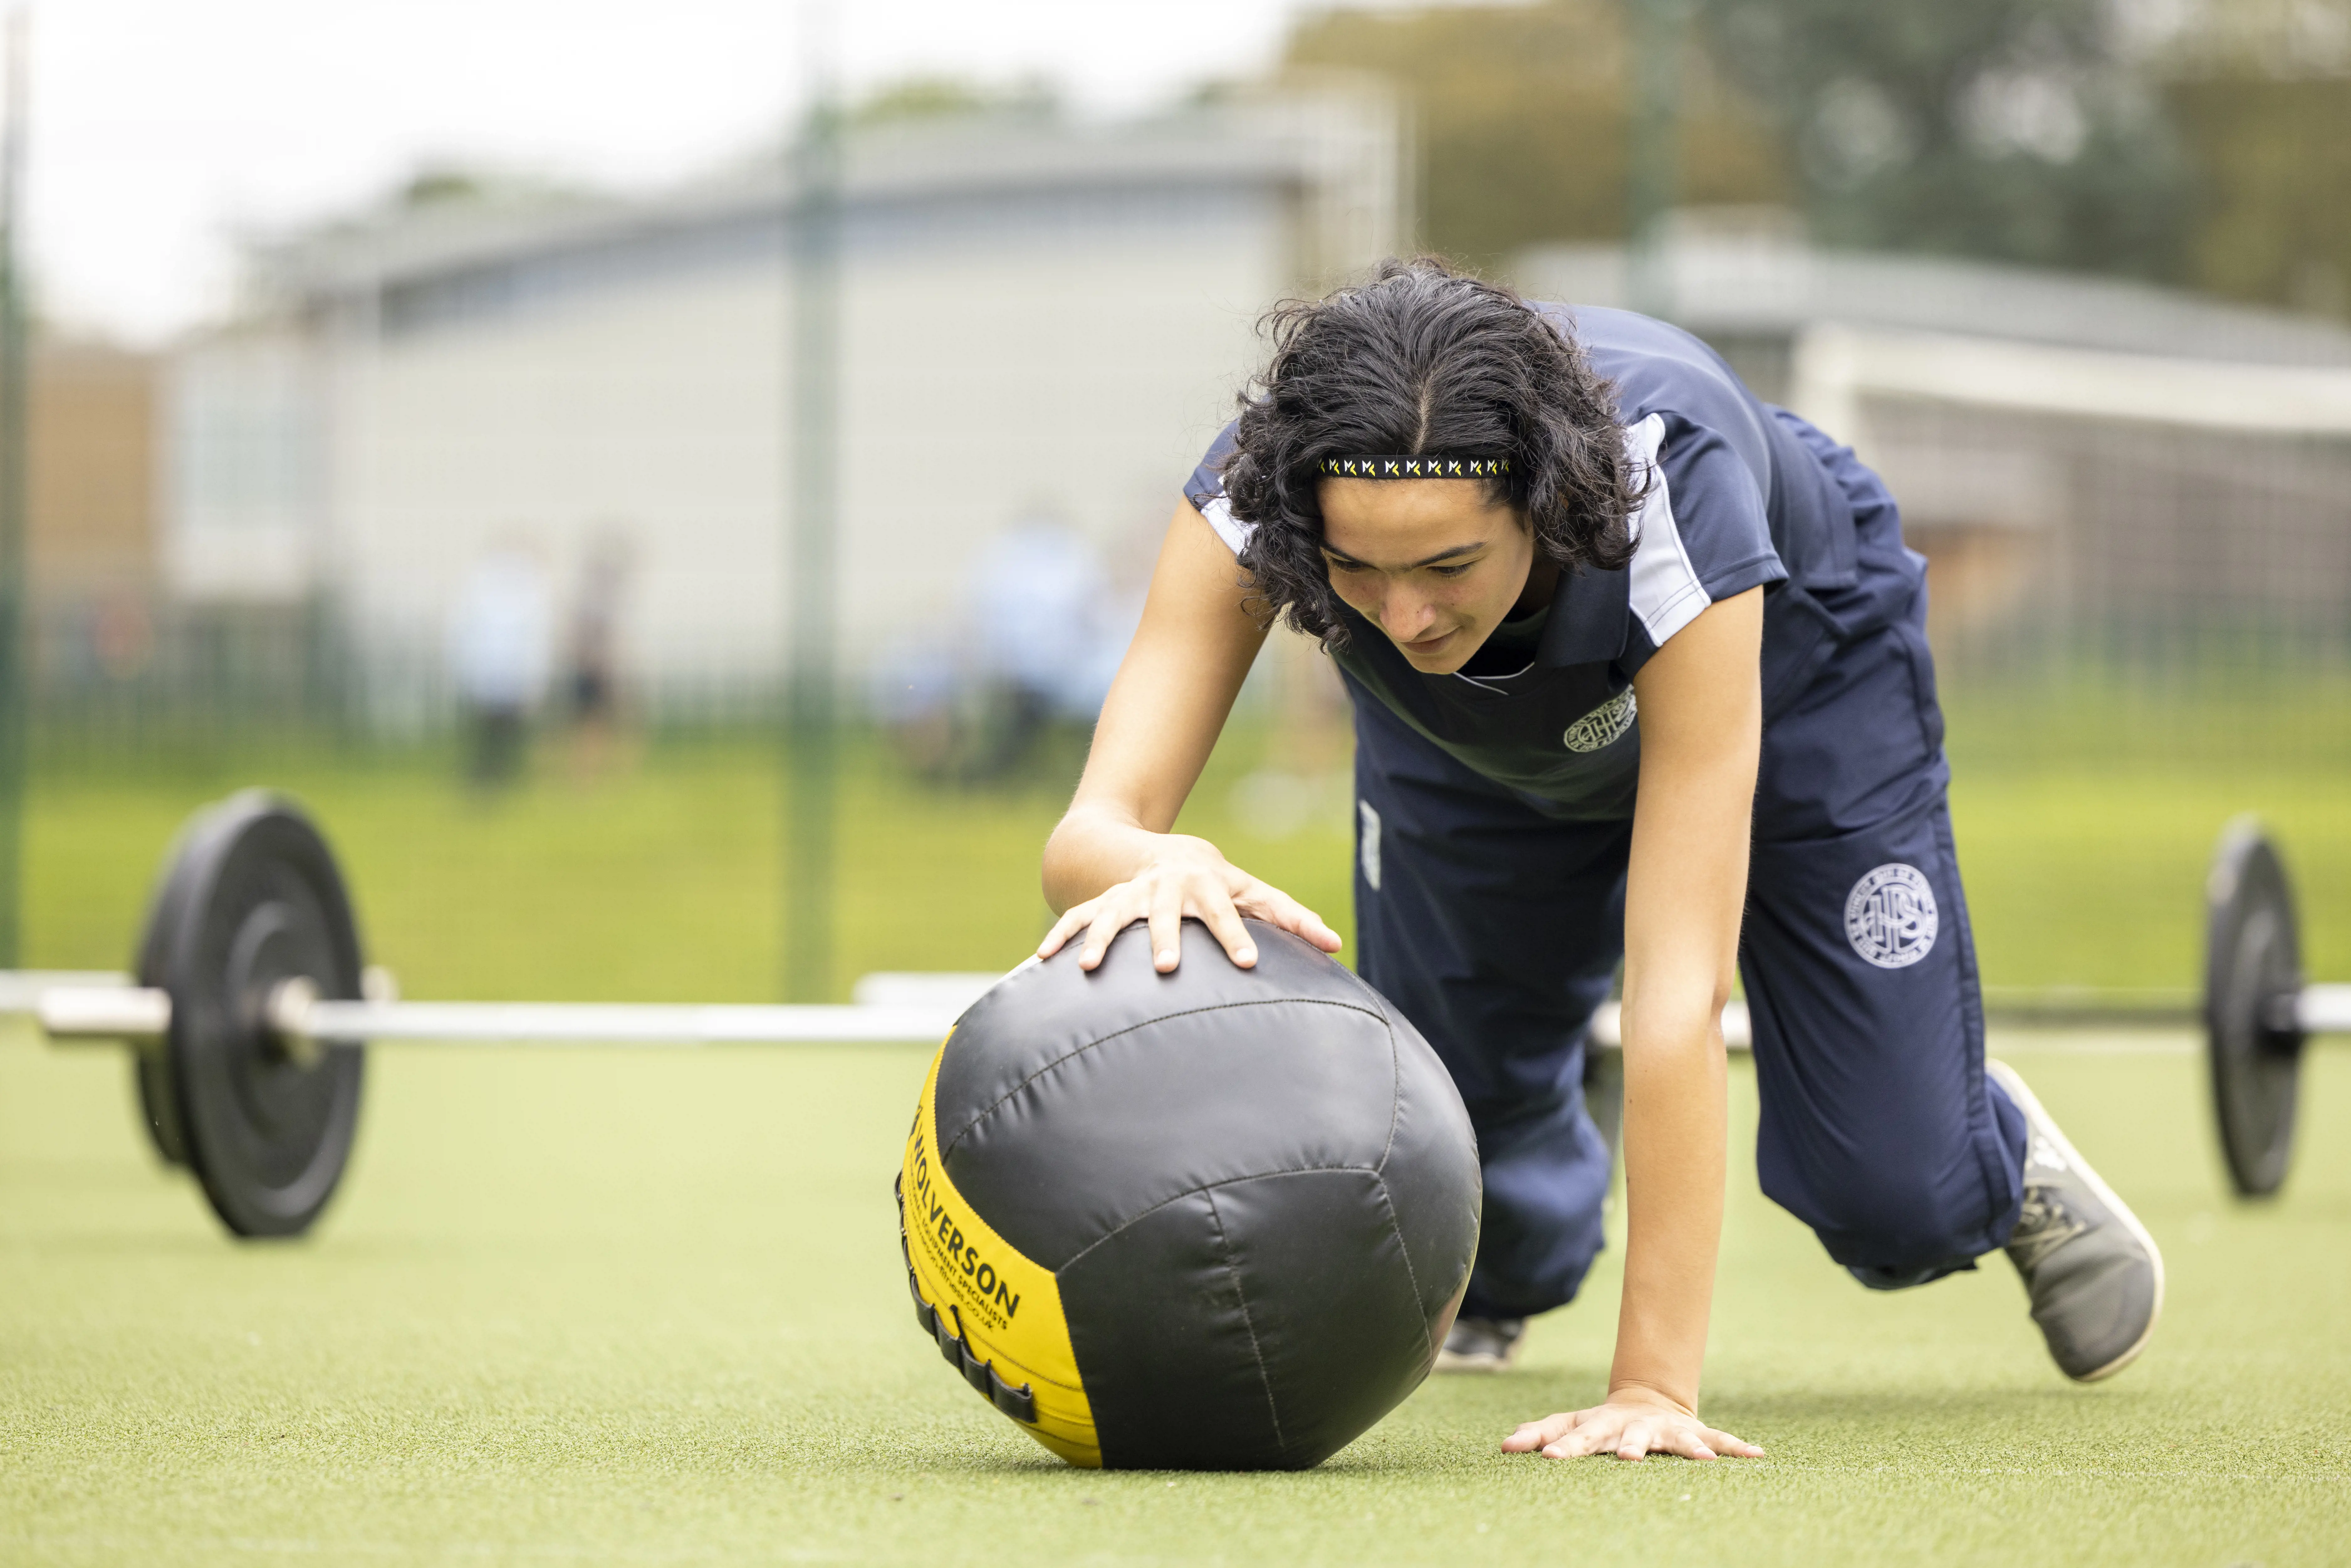 Sixth form girls doing a warm up at Ibstock Place School, a private school near Richmond, Barnes, Putney, Kingston, and Wandsworth